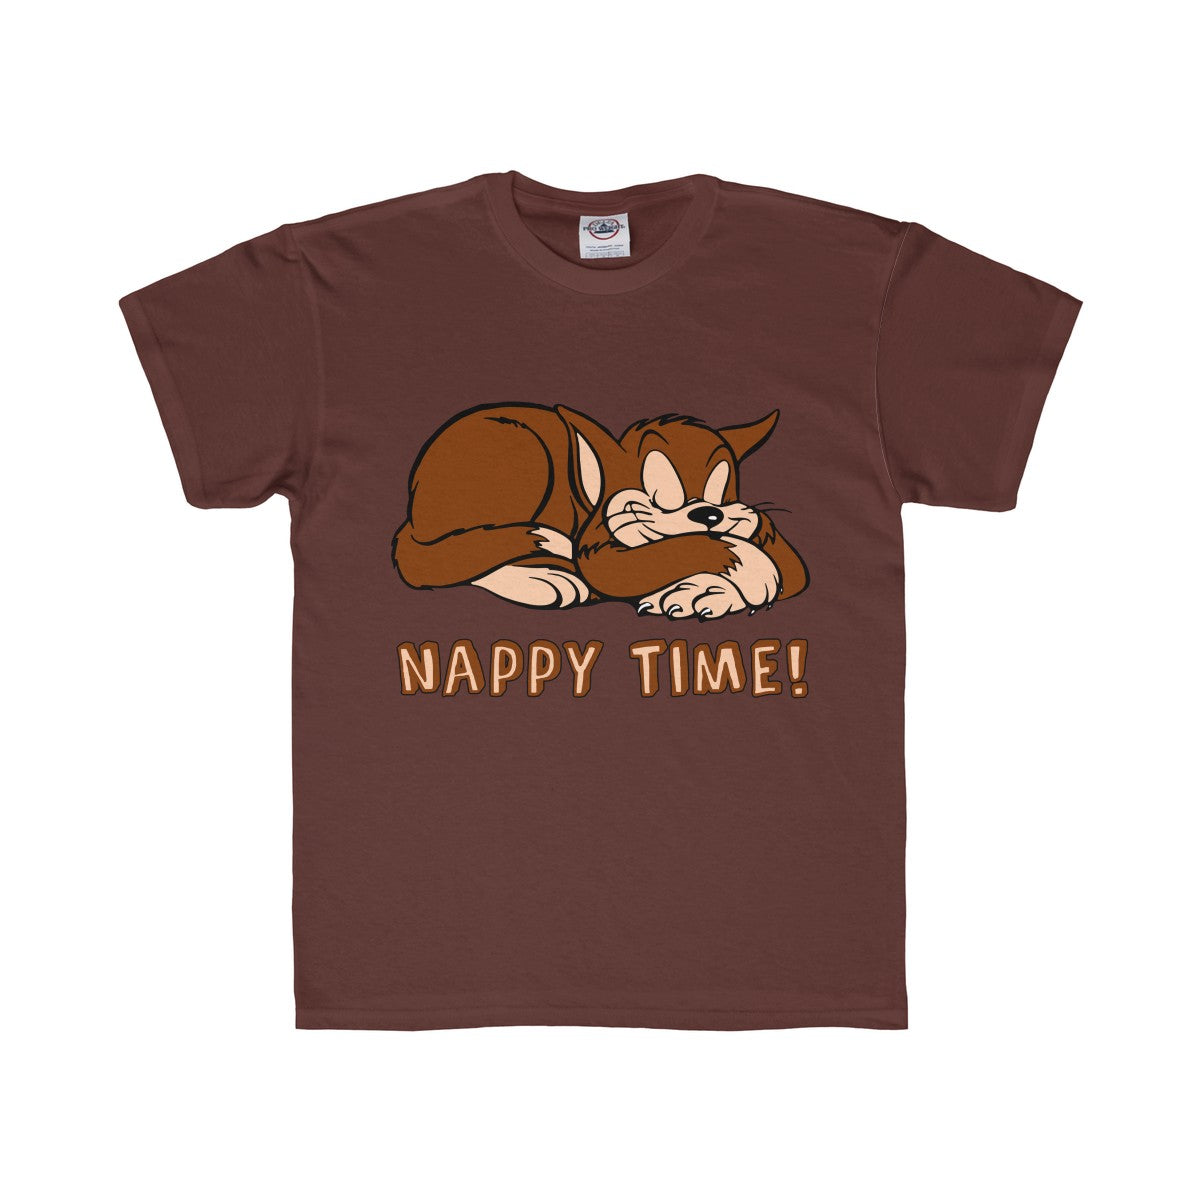 Nappy Time! with Sleeping Cat Youth Regular Fit Tee-Kids clothes-PureDesignTees